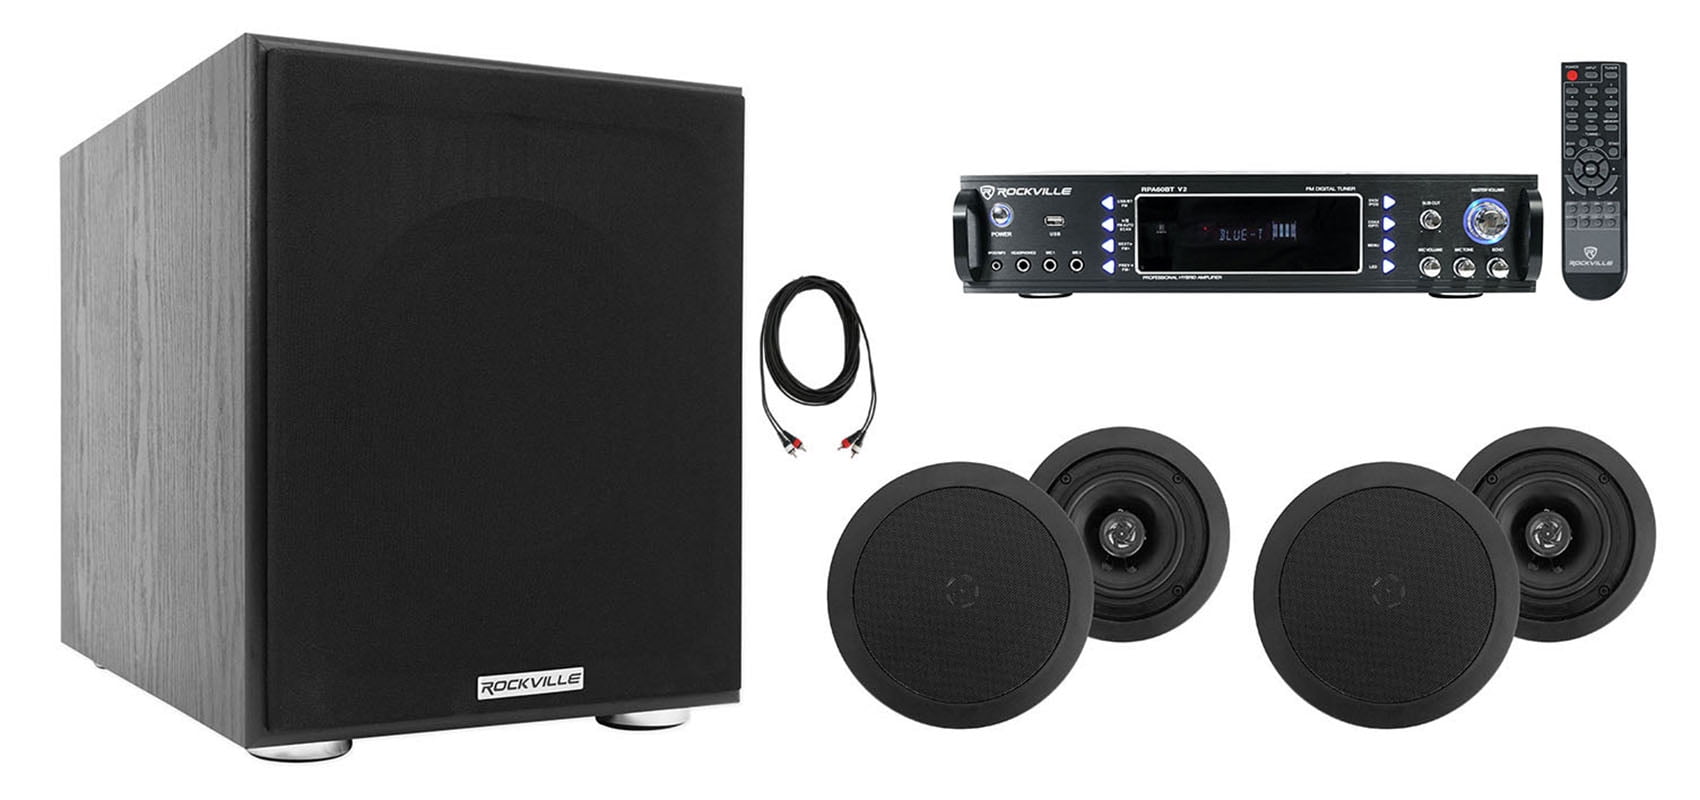 Speakers+8 Subwoofer Sub Rockville 1000 w Home Theater Bluetooth Receiver+ 4